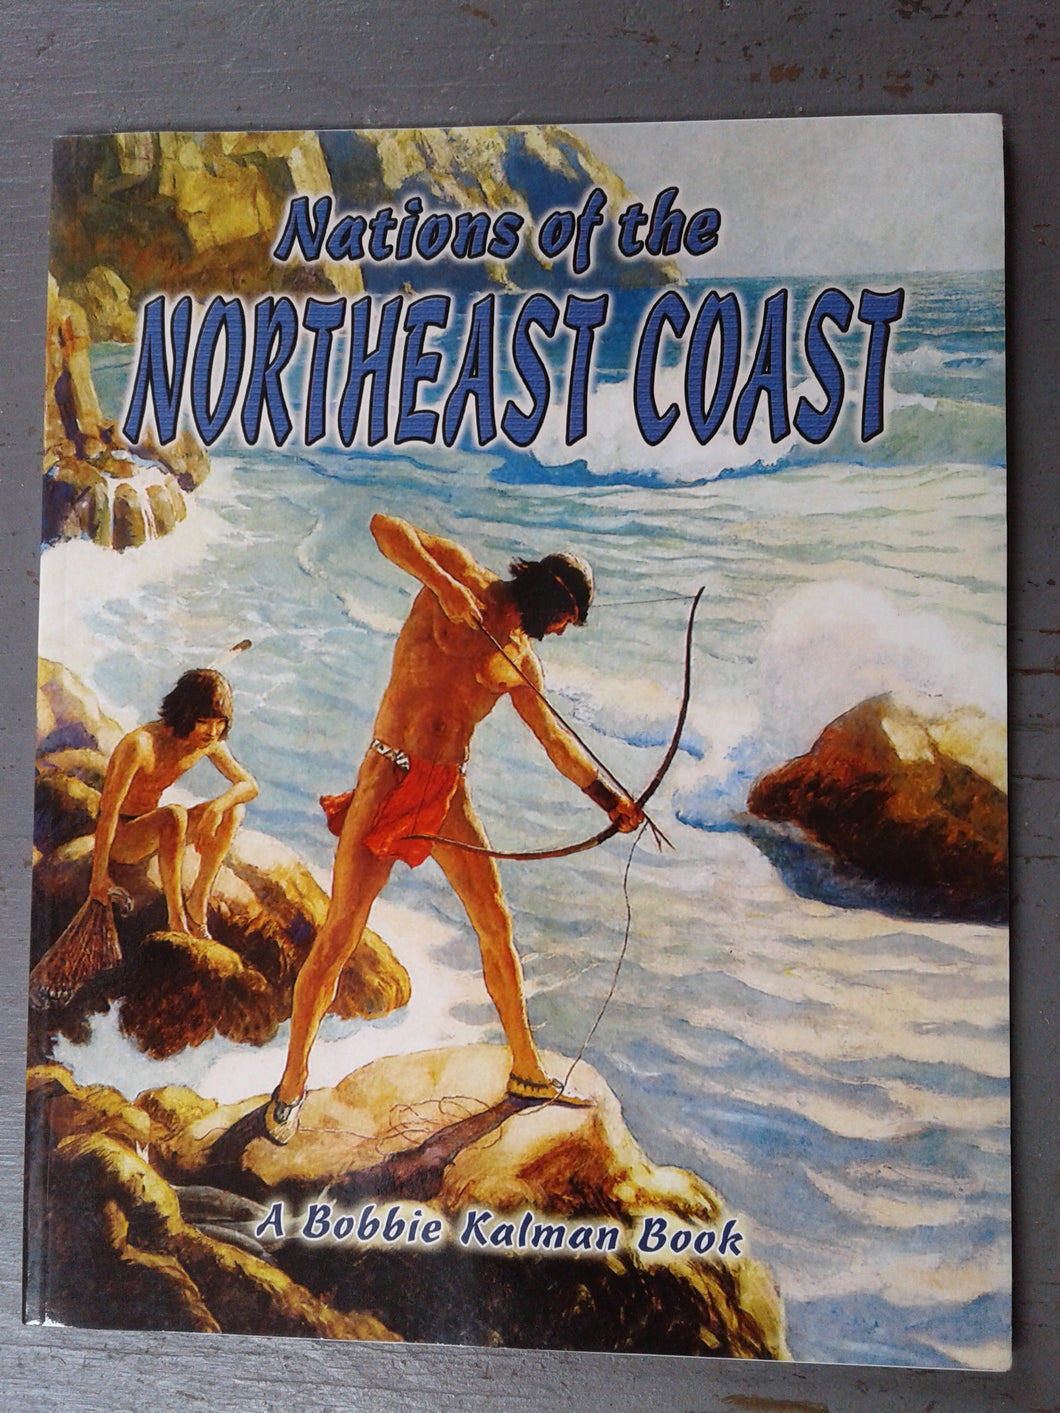 Book Children's - Nations of the Northeast Coast